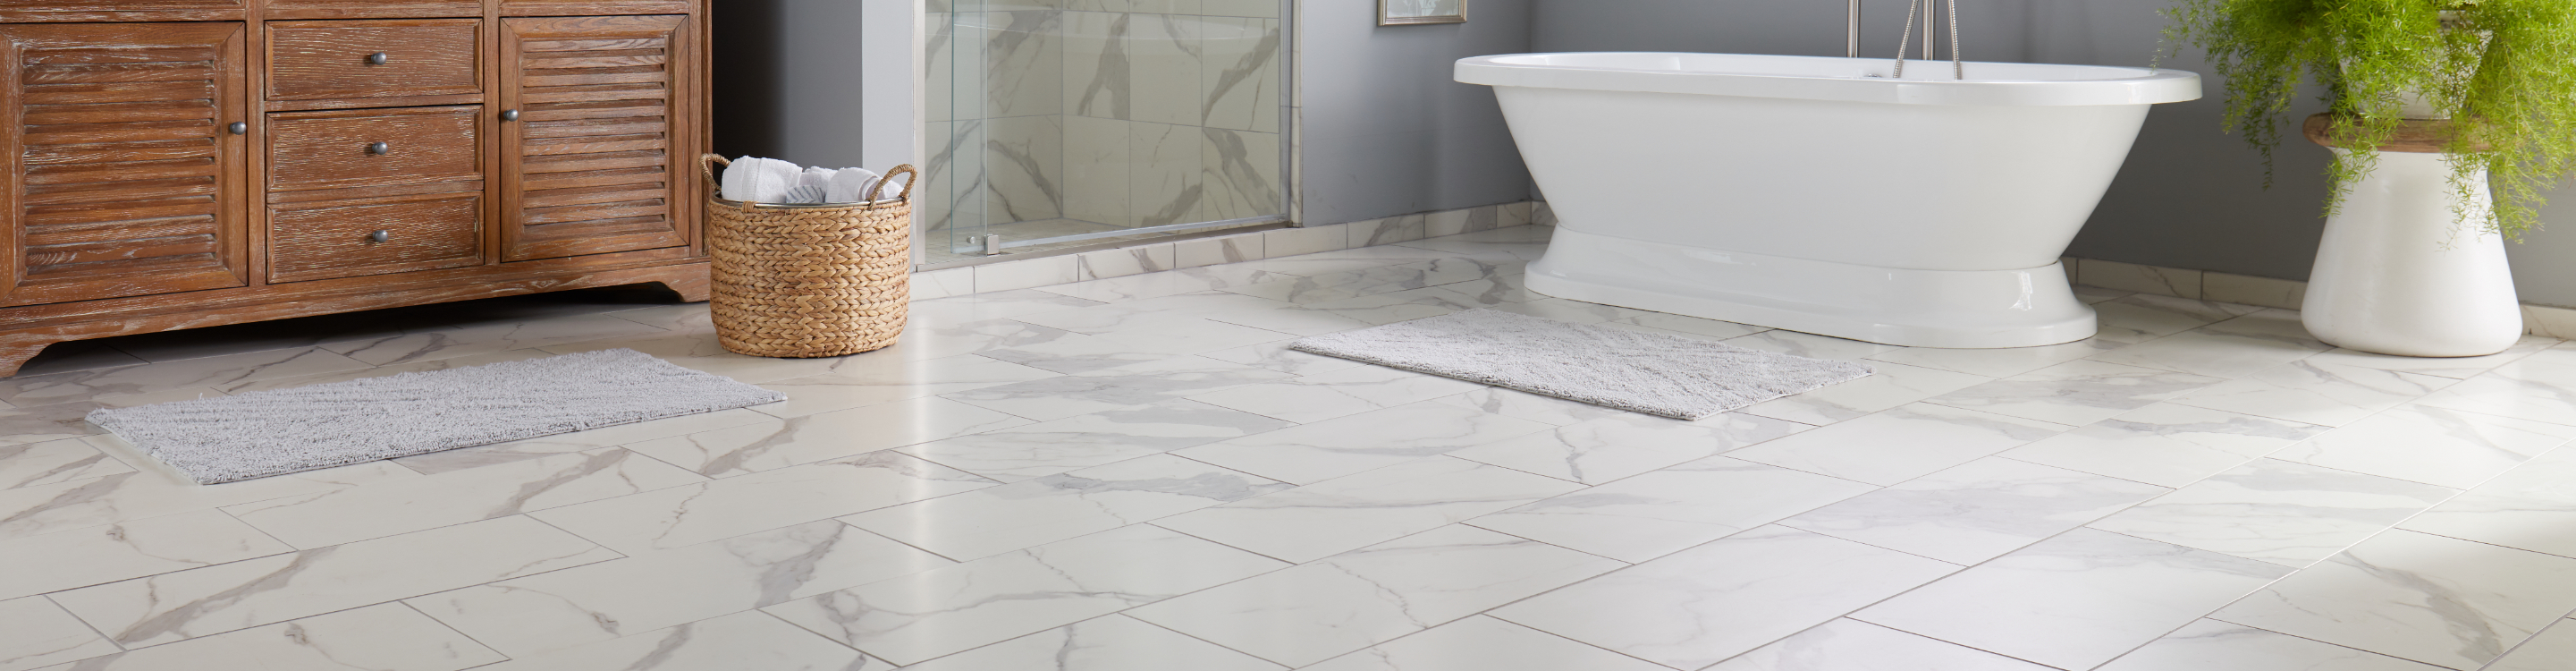 marble tile in a traditional bathroom with large soaker tub